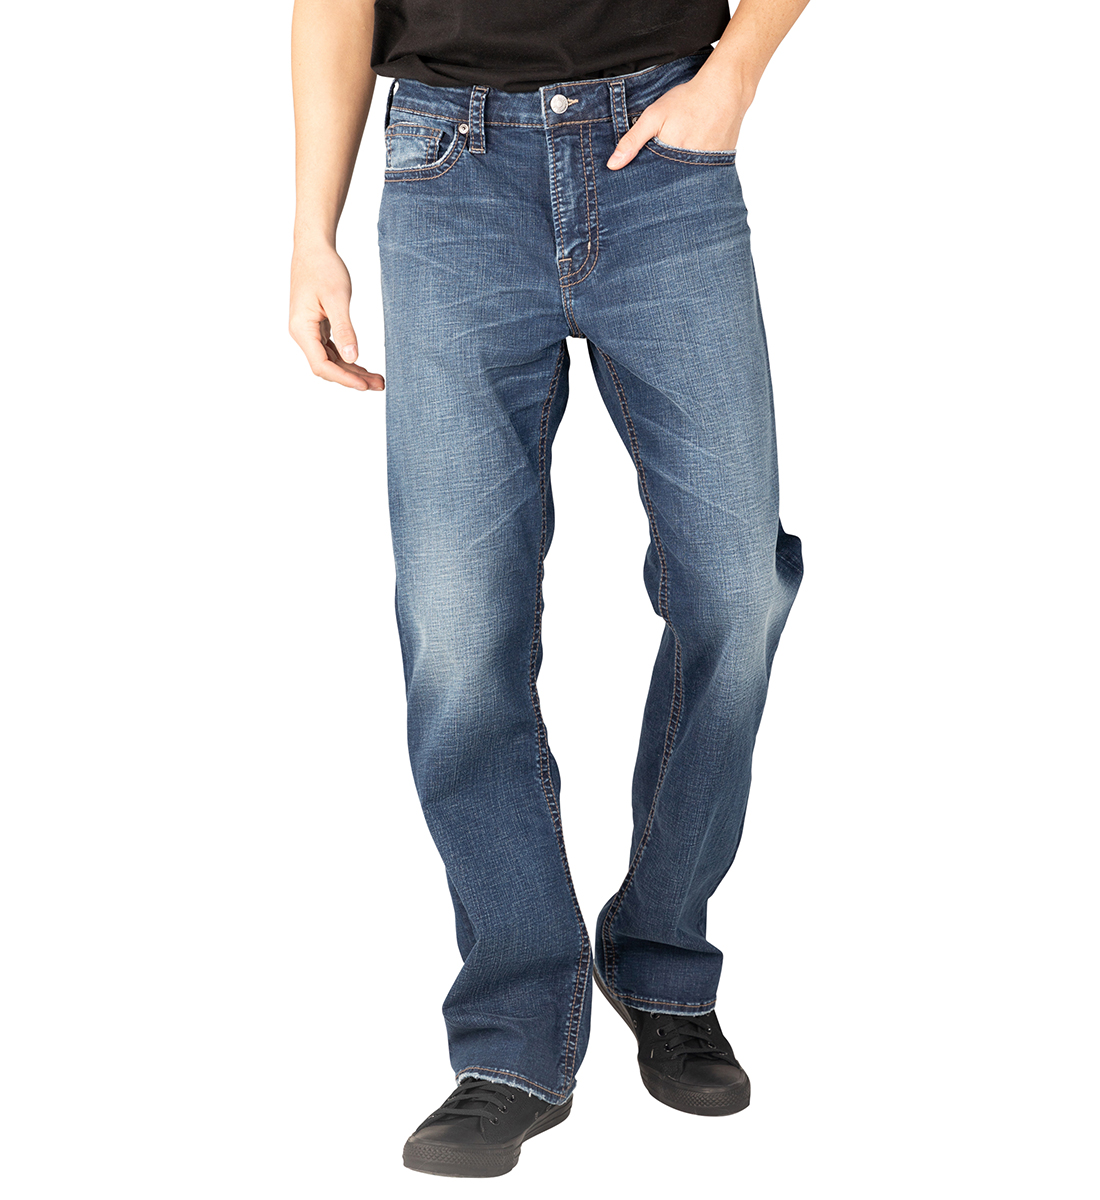 Craig Easy Fit Bootcut Jeans - Silver Jeans US